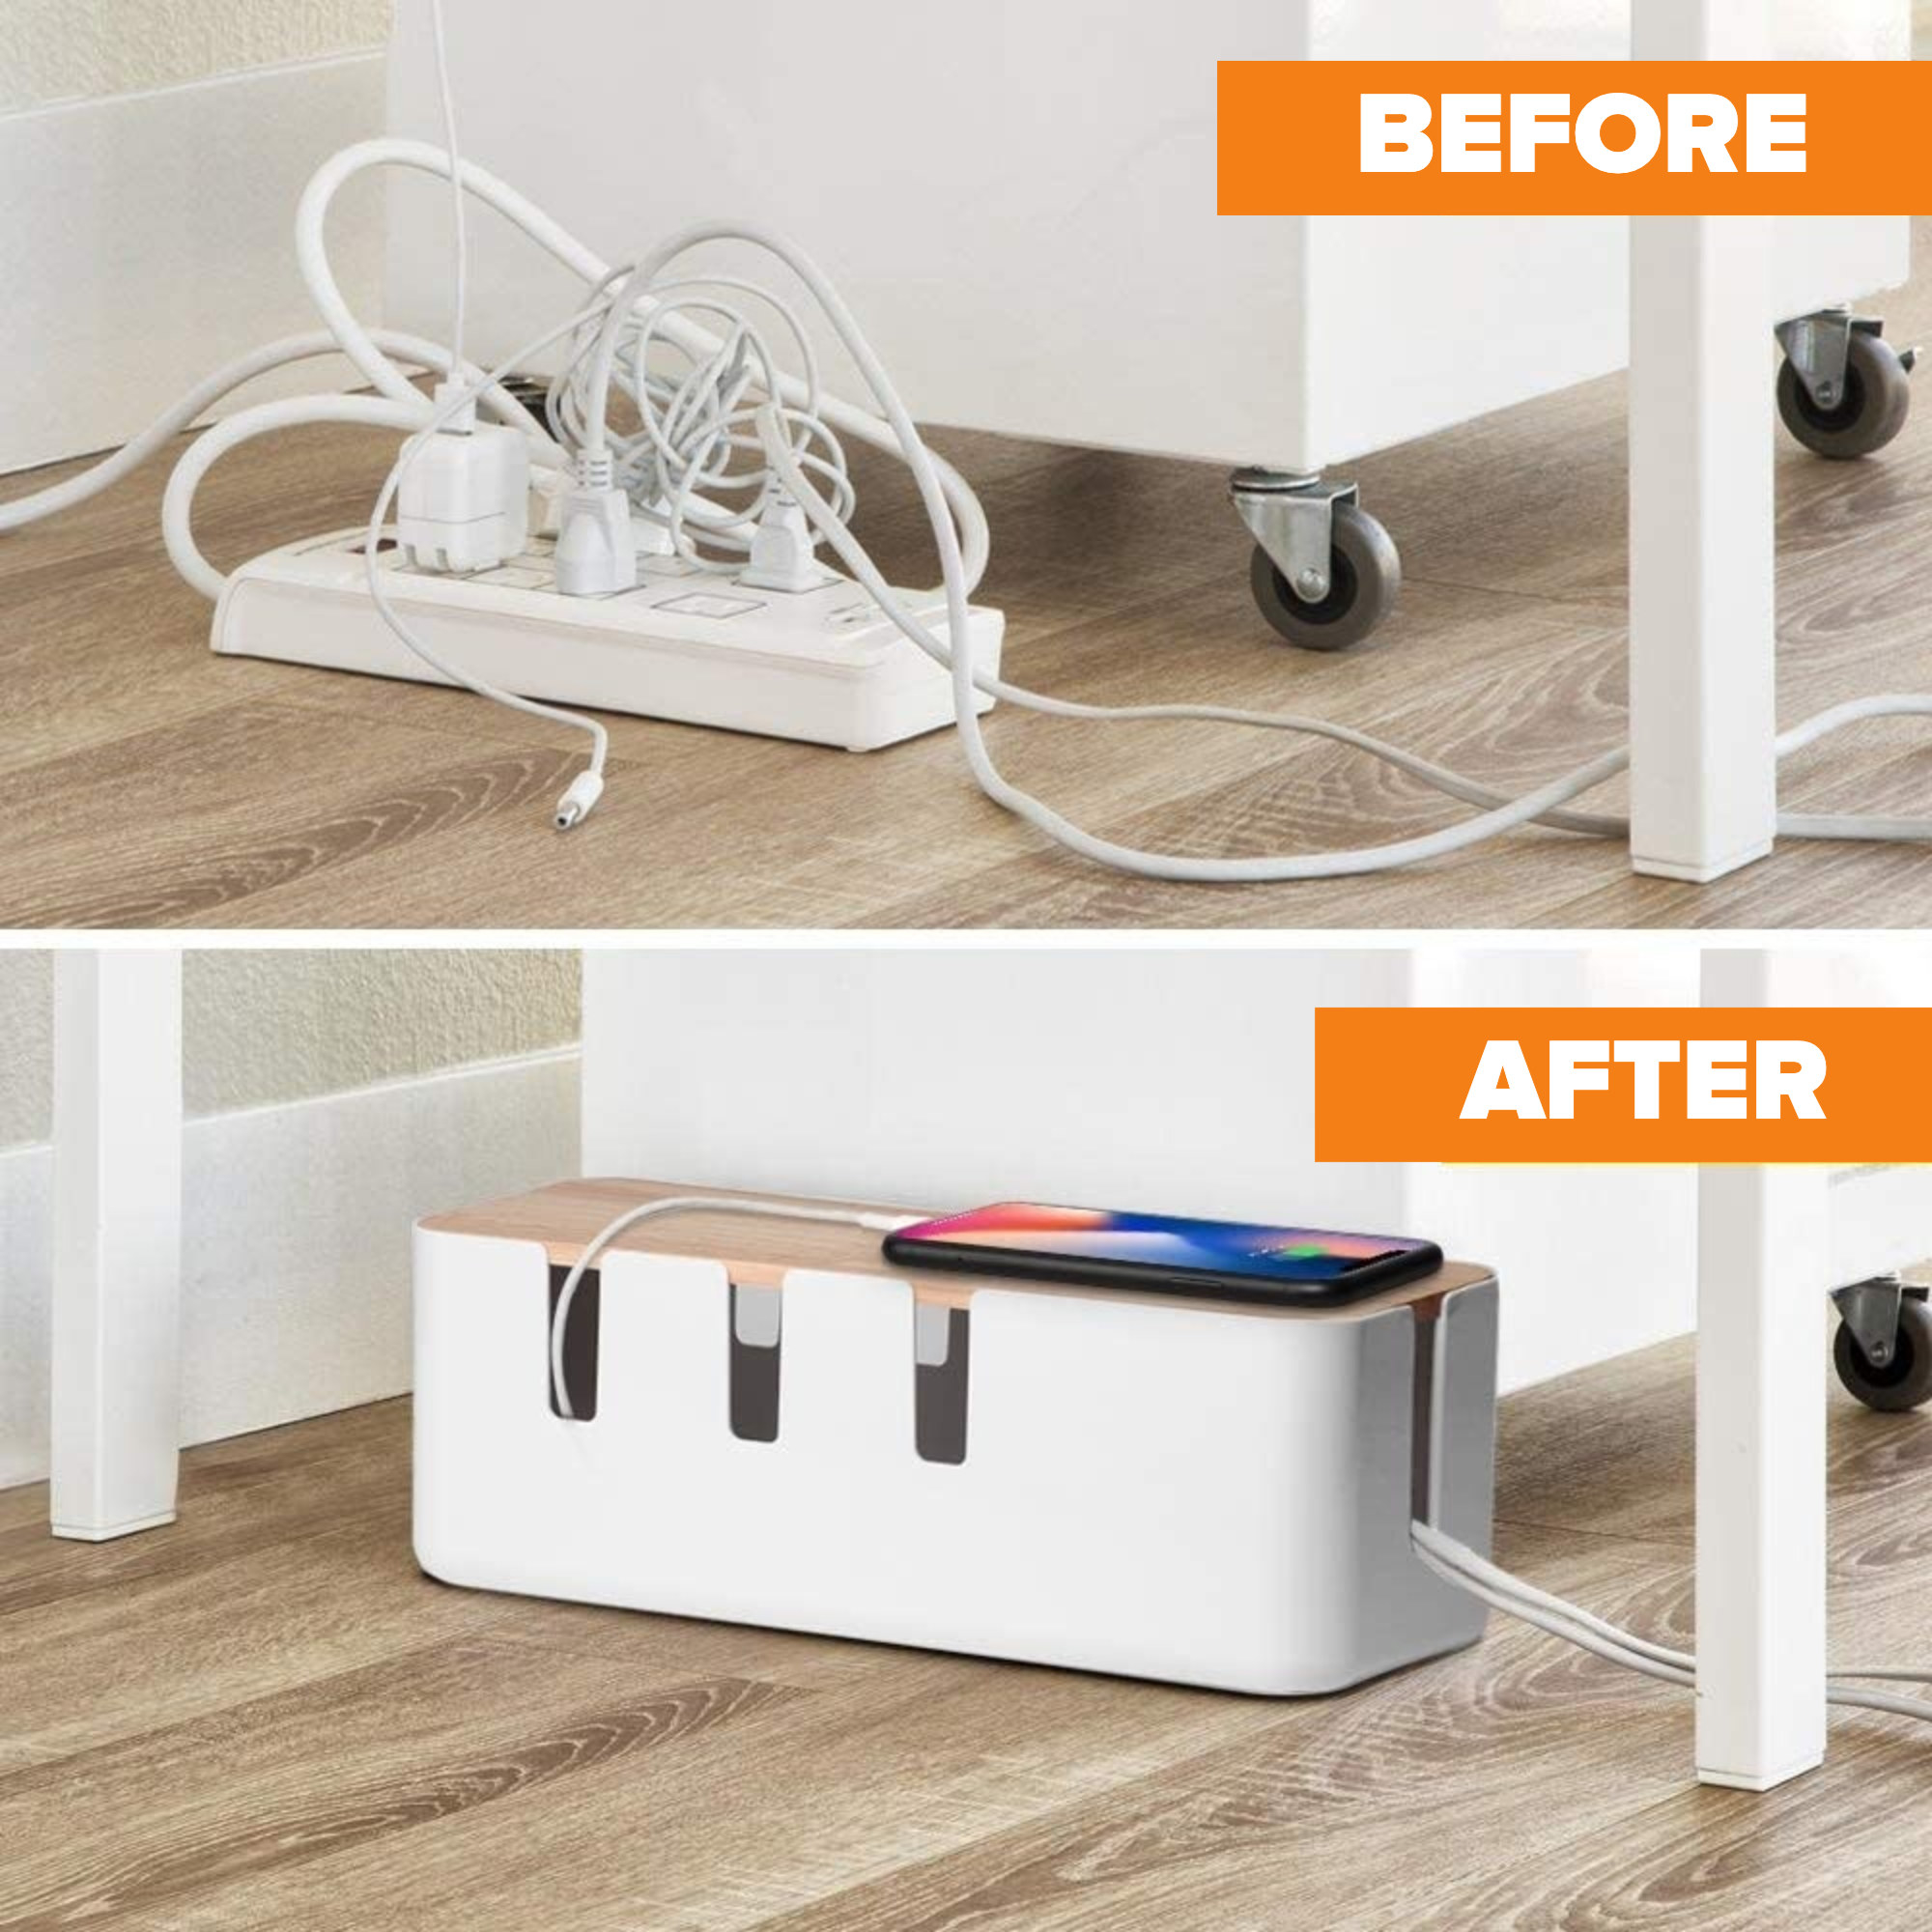 The before and after photos of an extension cord messily out in the open and then covered and organized inside of the cord box